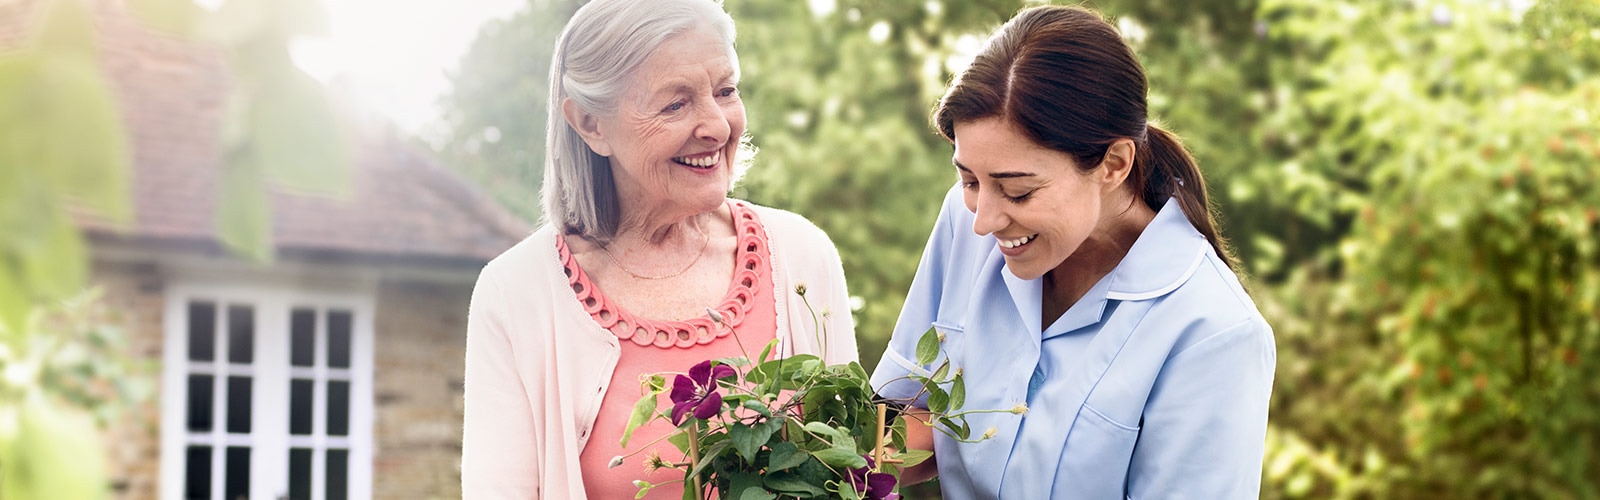 TENA Solutions for continence care